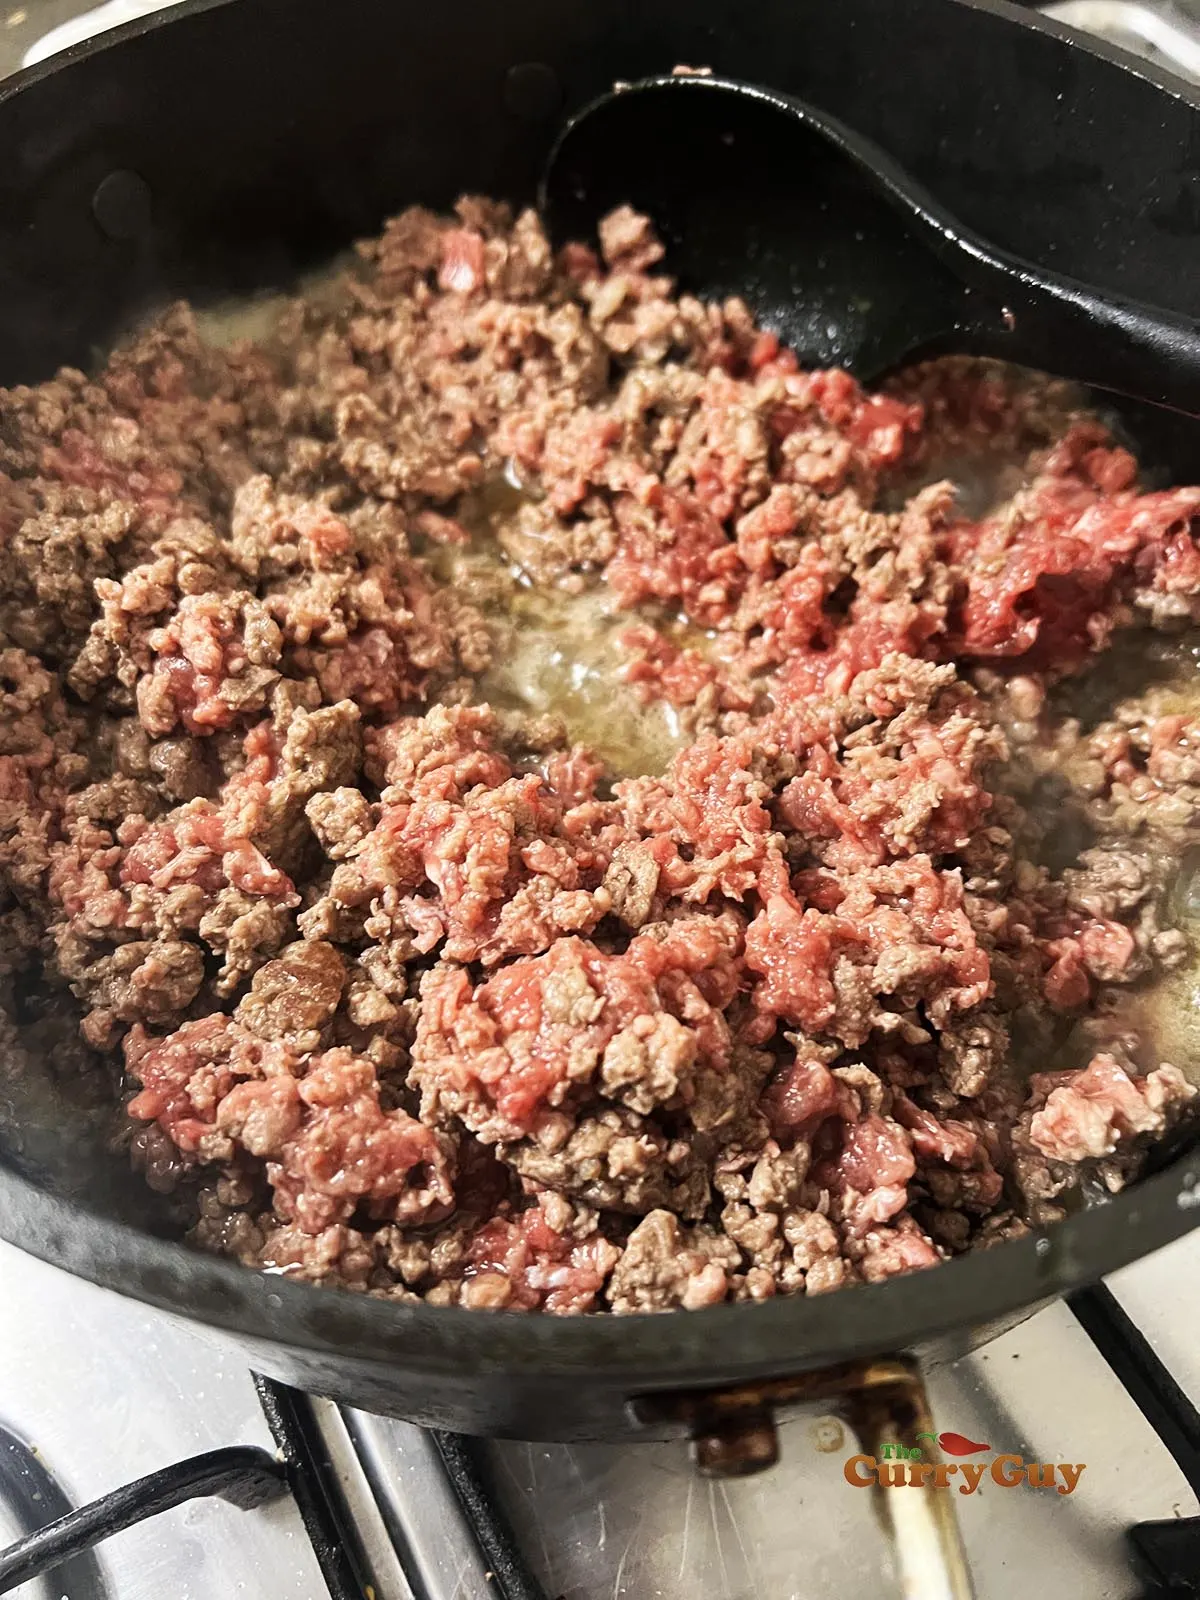 Browning the beef in a pan.